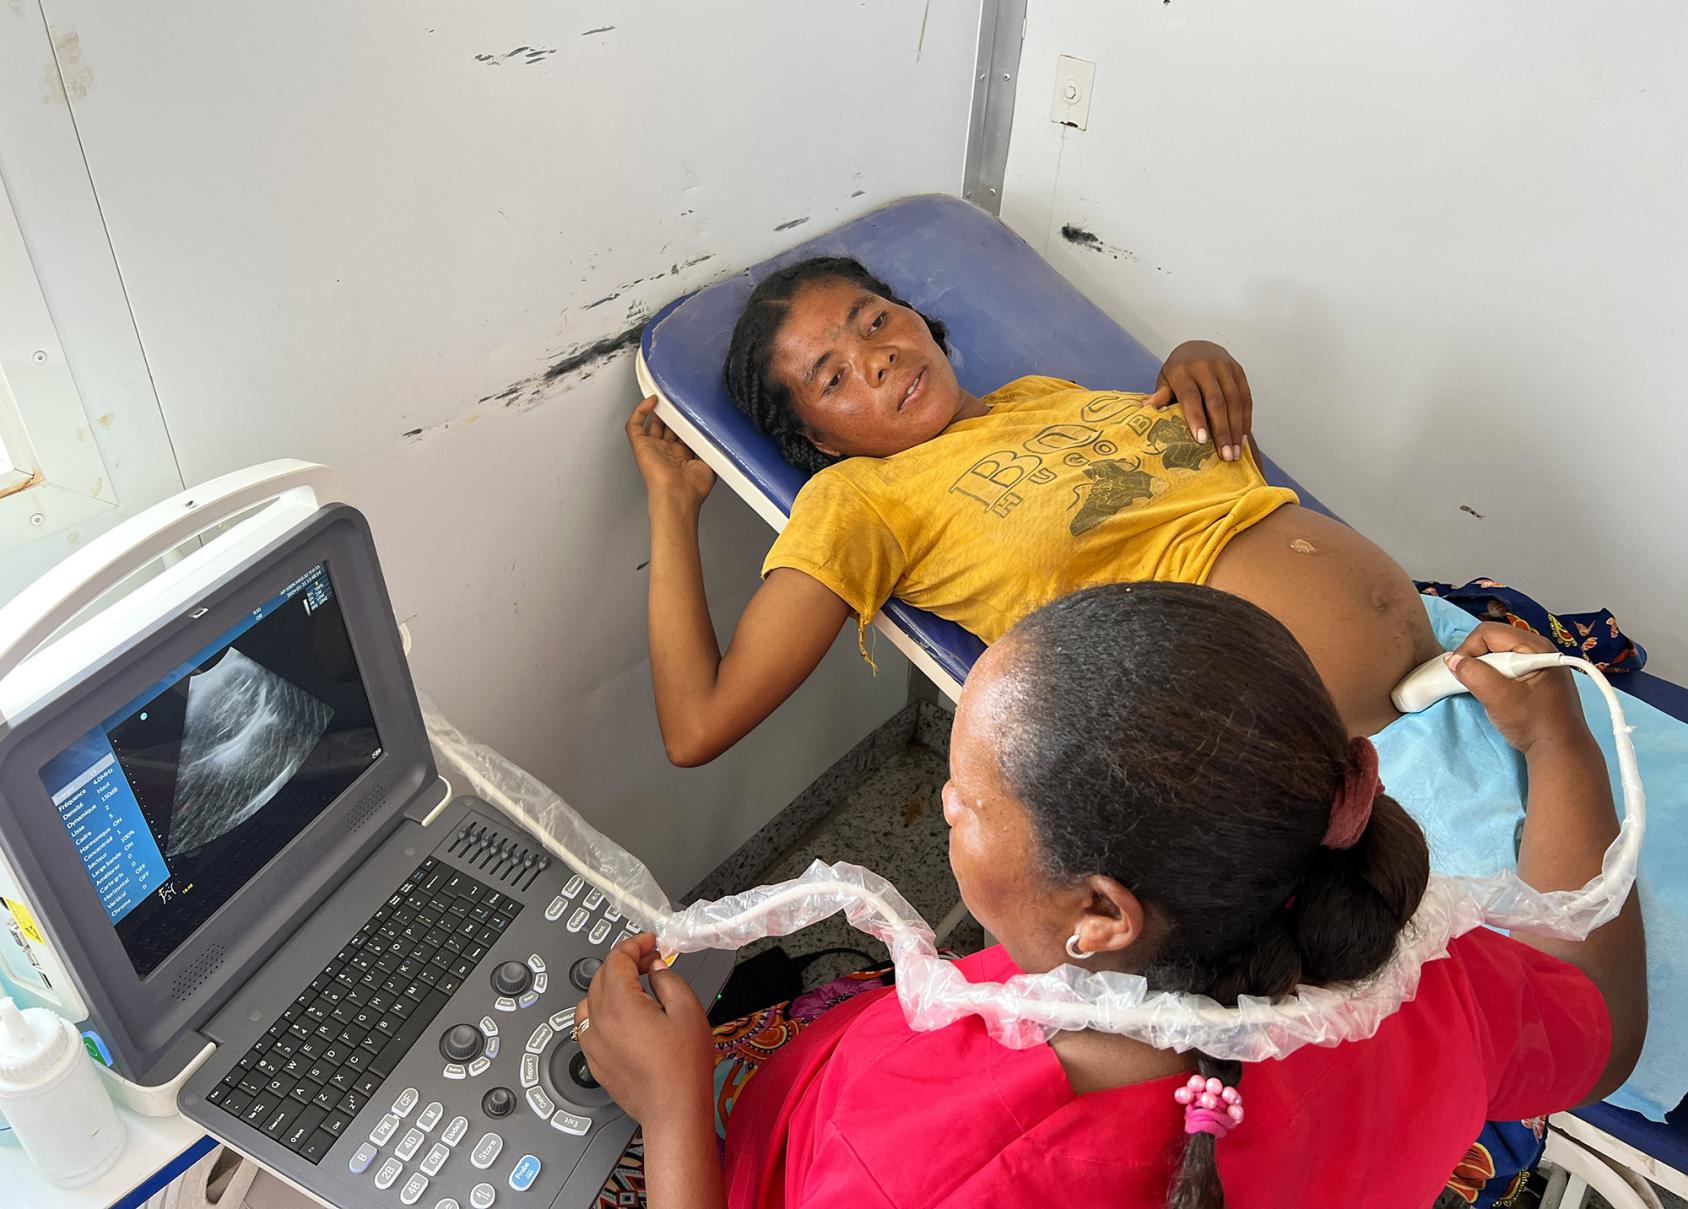 A pregnant woman in a yellow dress lies on a bed while a doctor in a red shirt scans her stomach with a medical device.